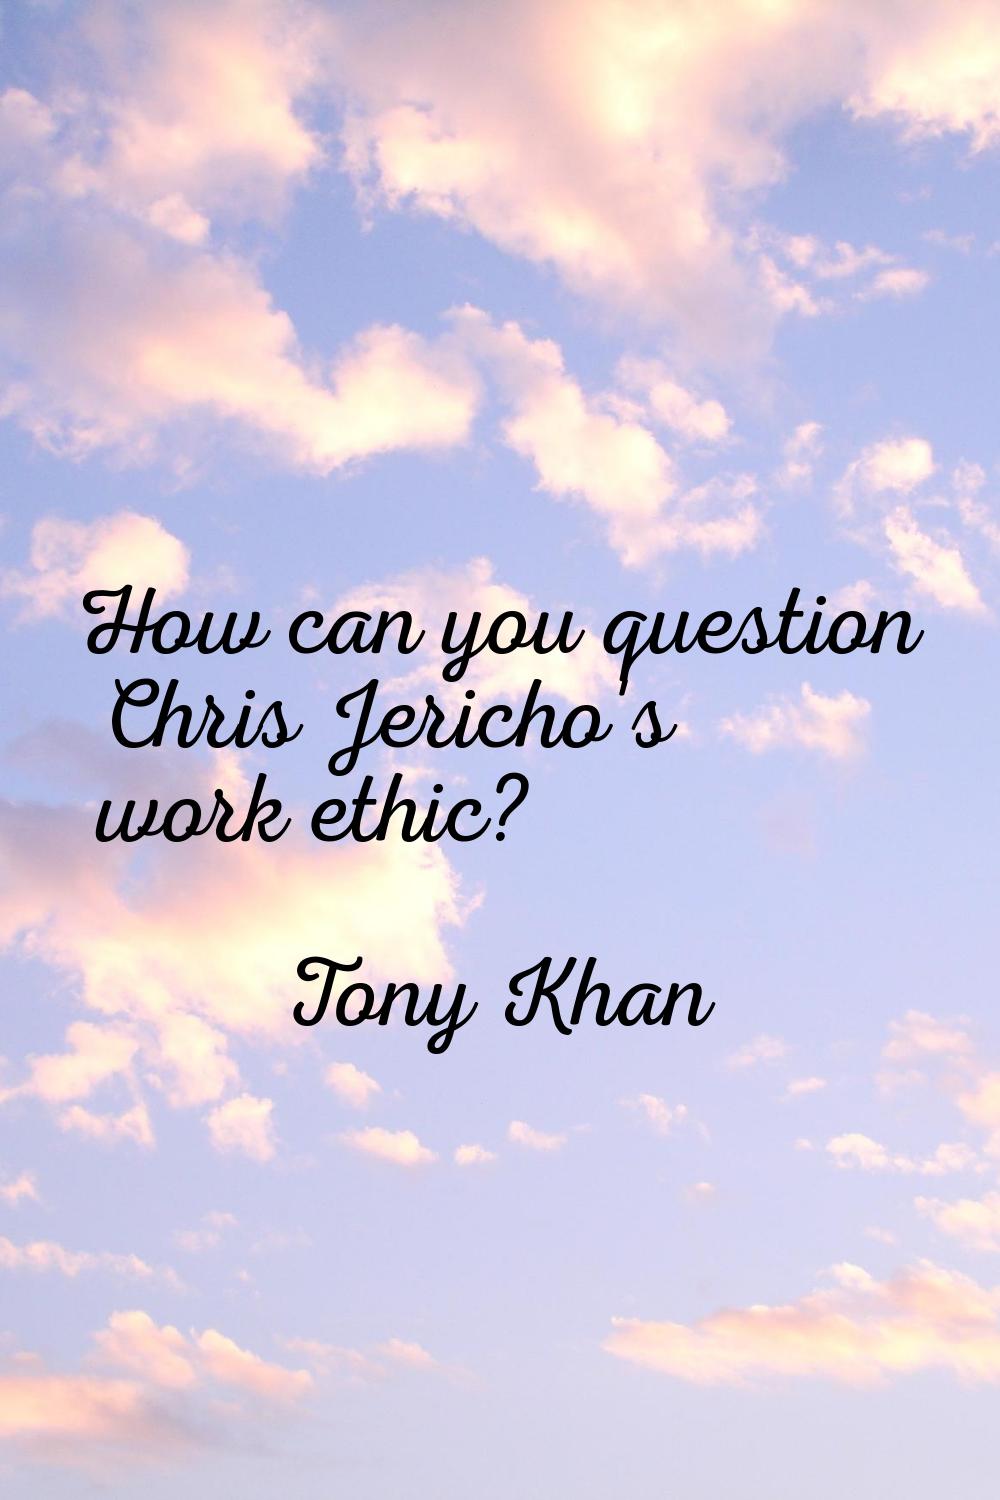 How can you question Chris Jericho's work ethic?